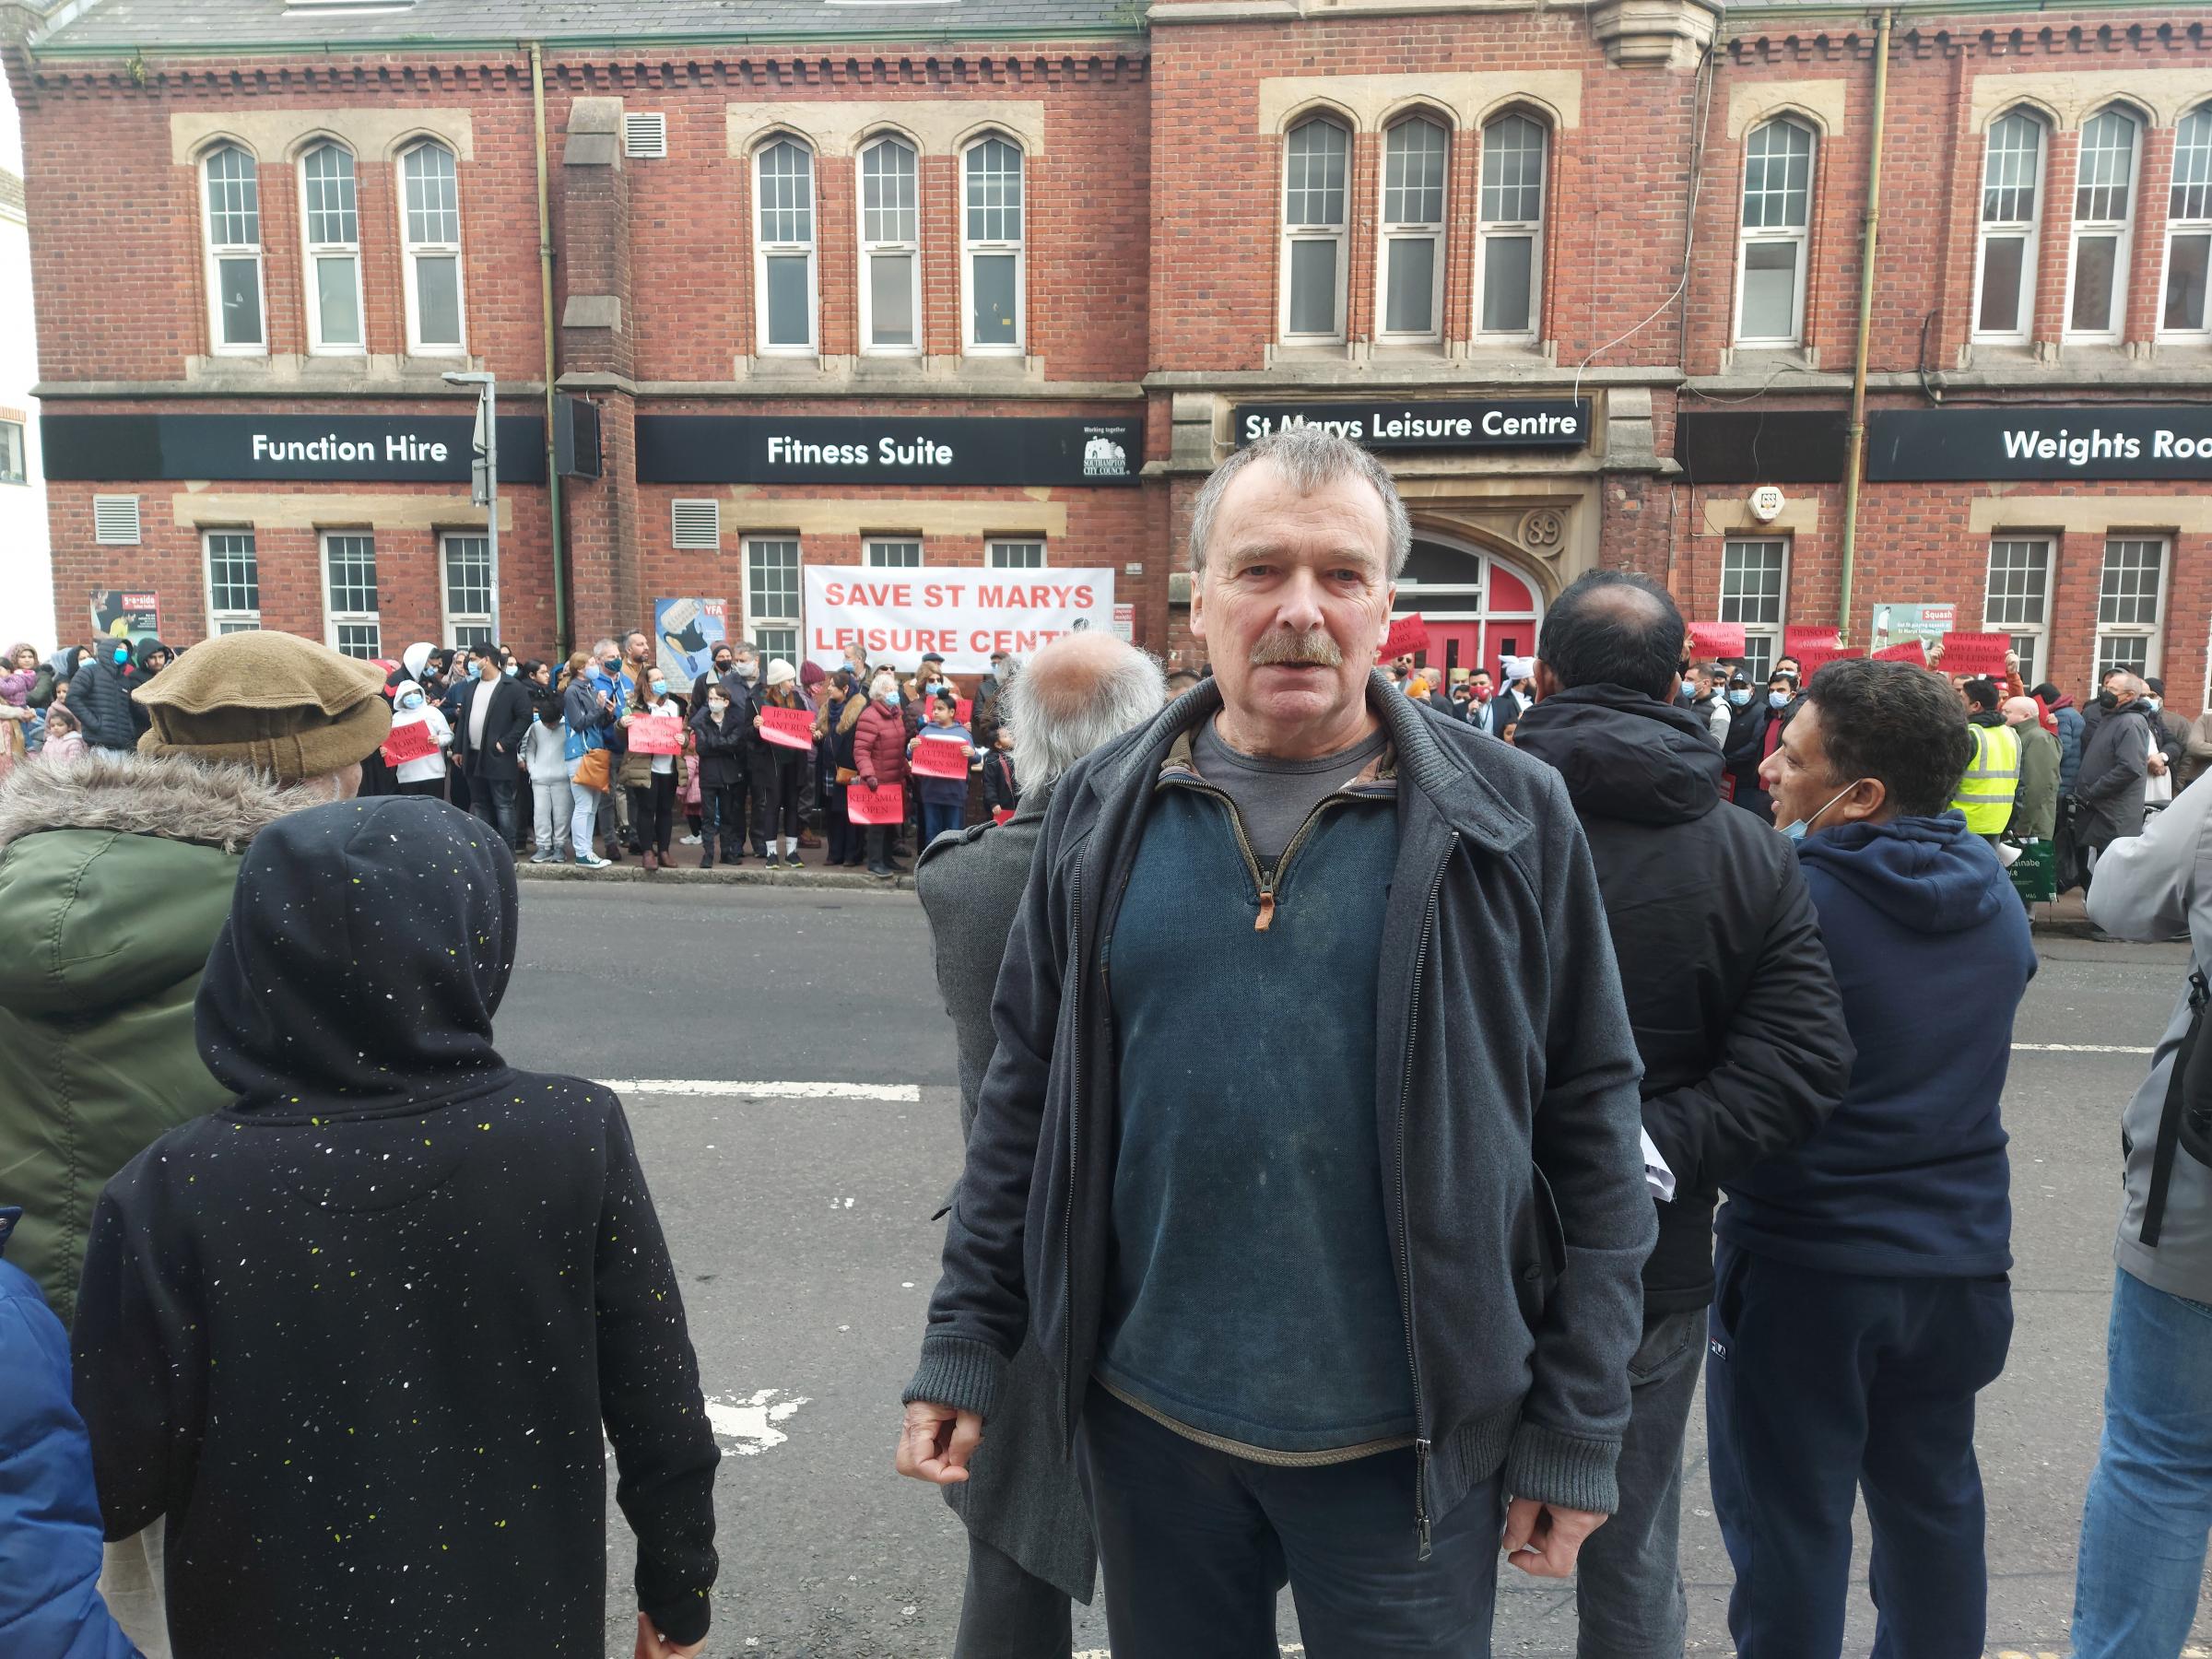 MP Alan Whitehead at the protest